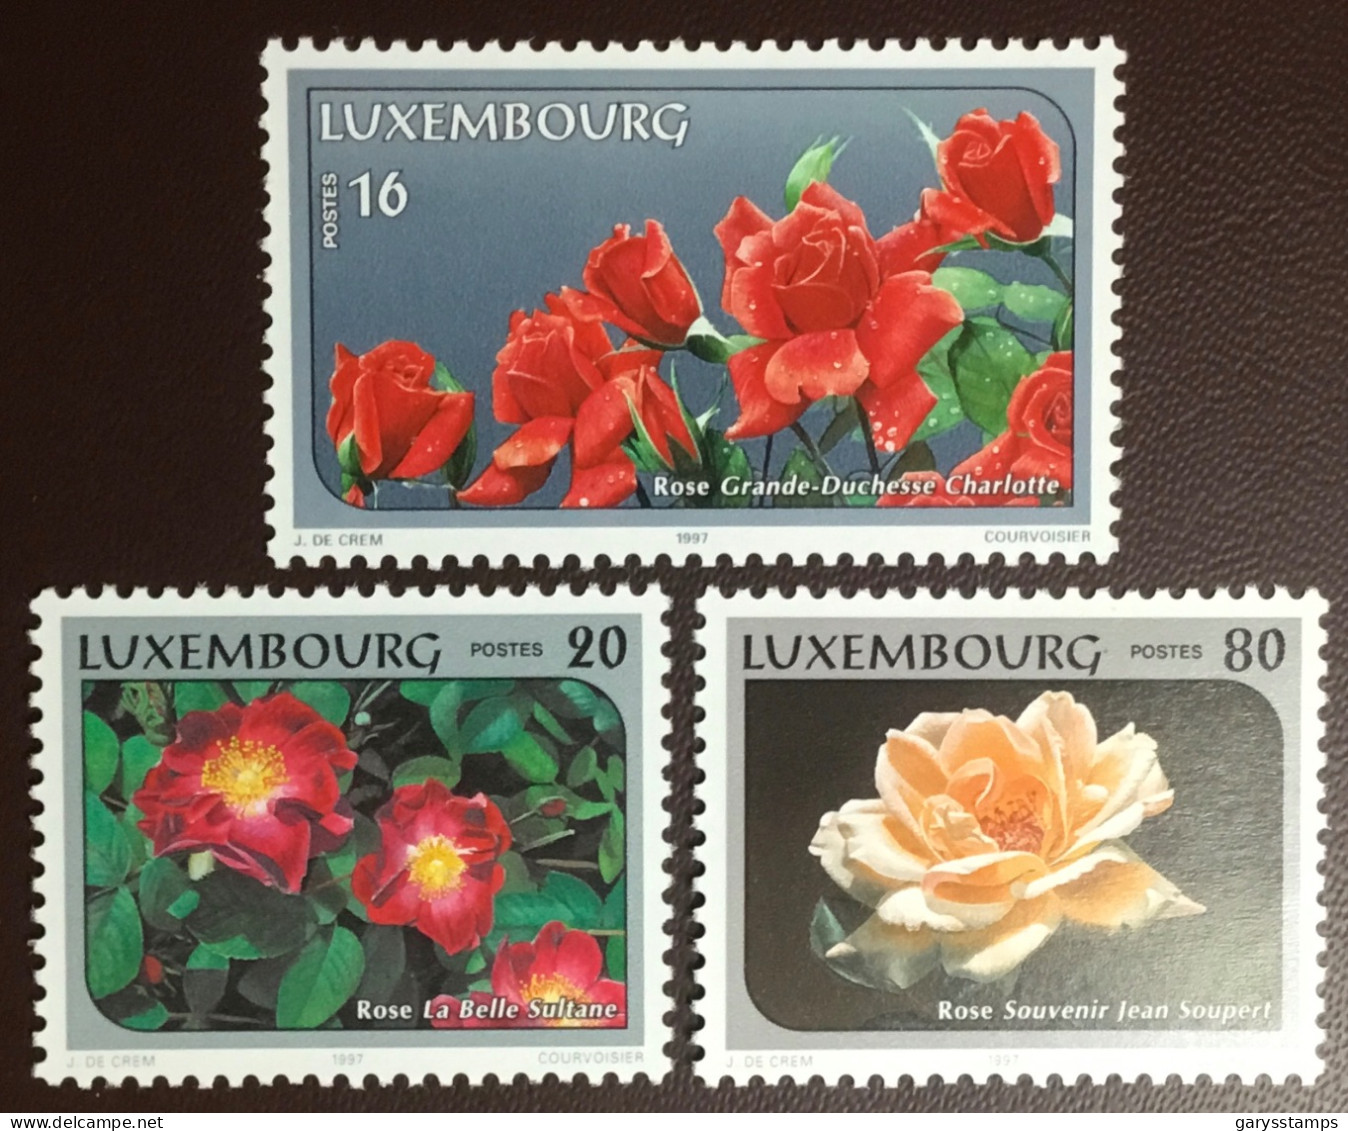 Luxembourg 1997 Rose Congress Roses Flowers MNH - Rose